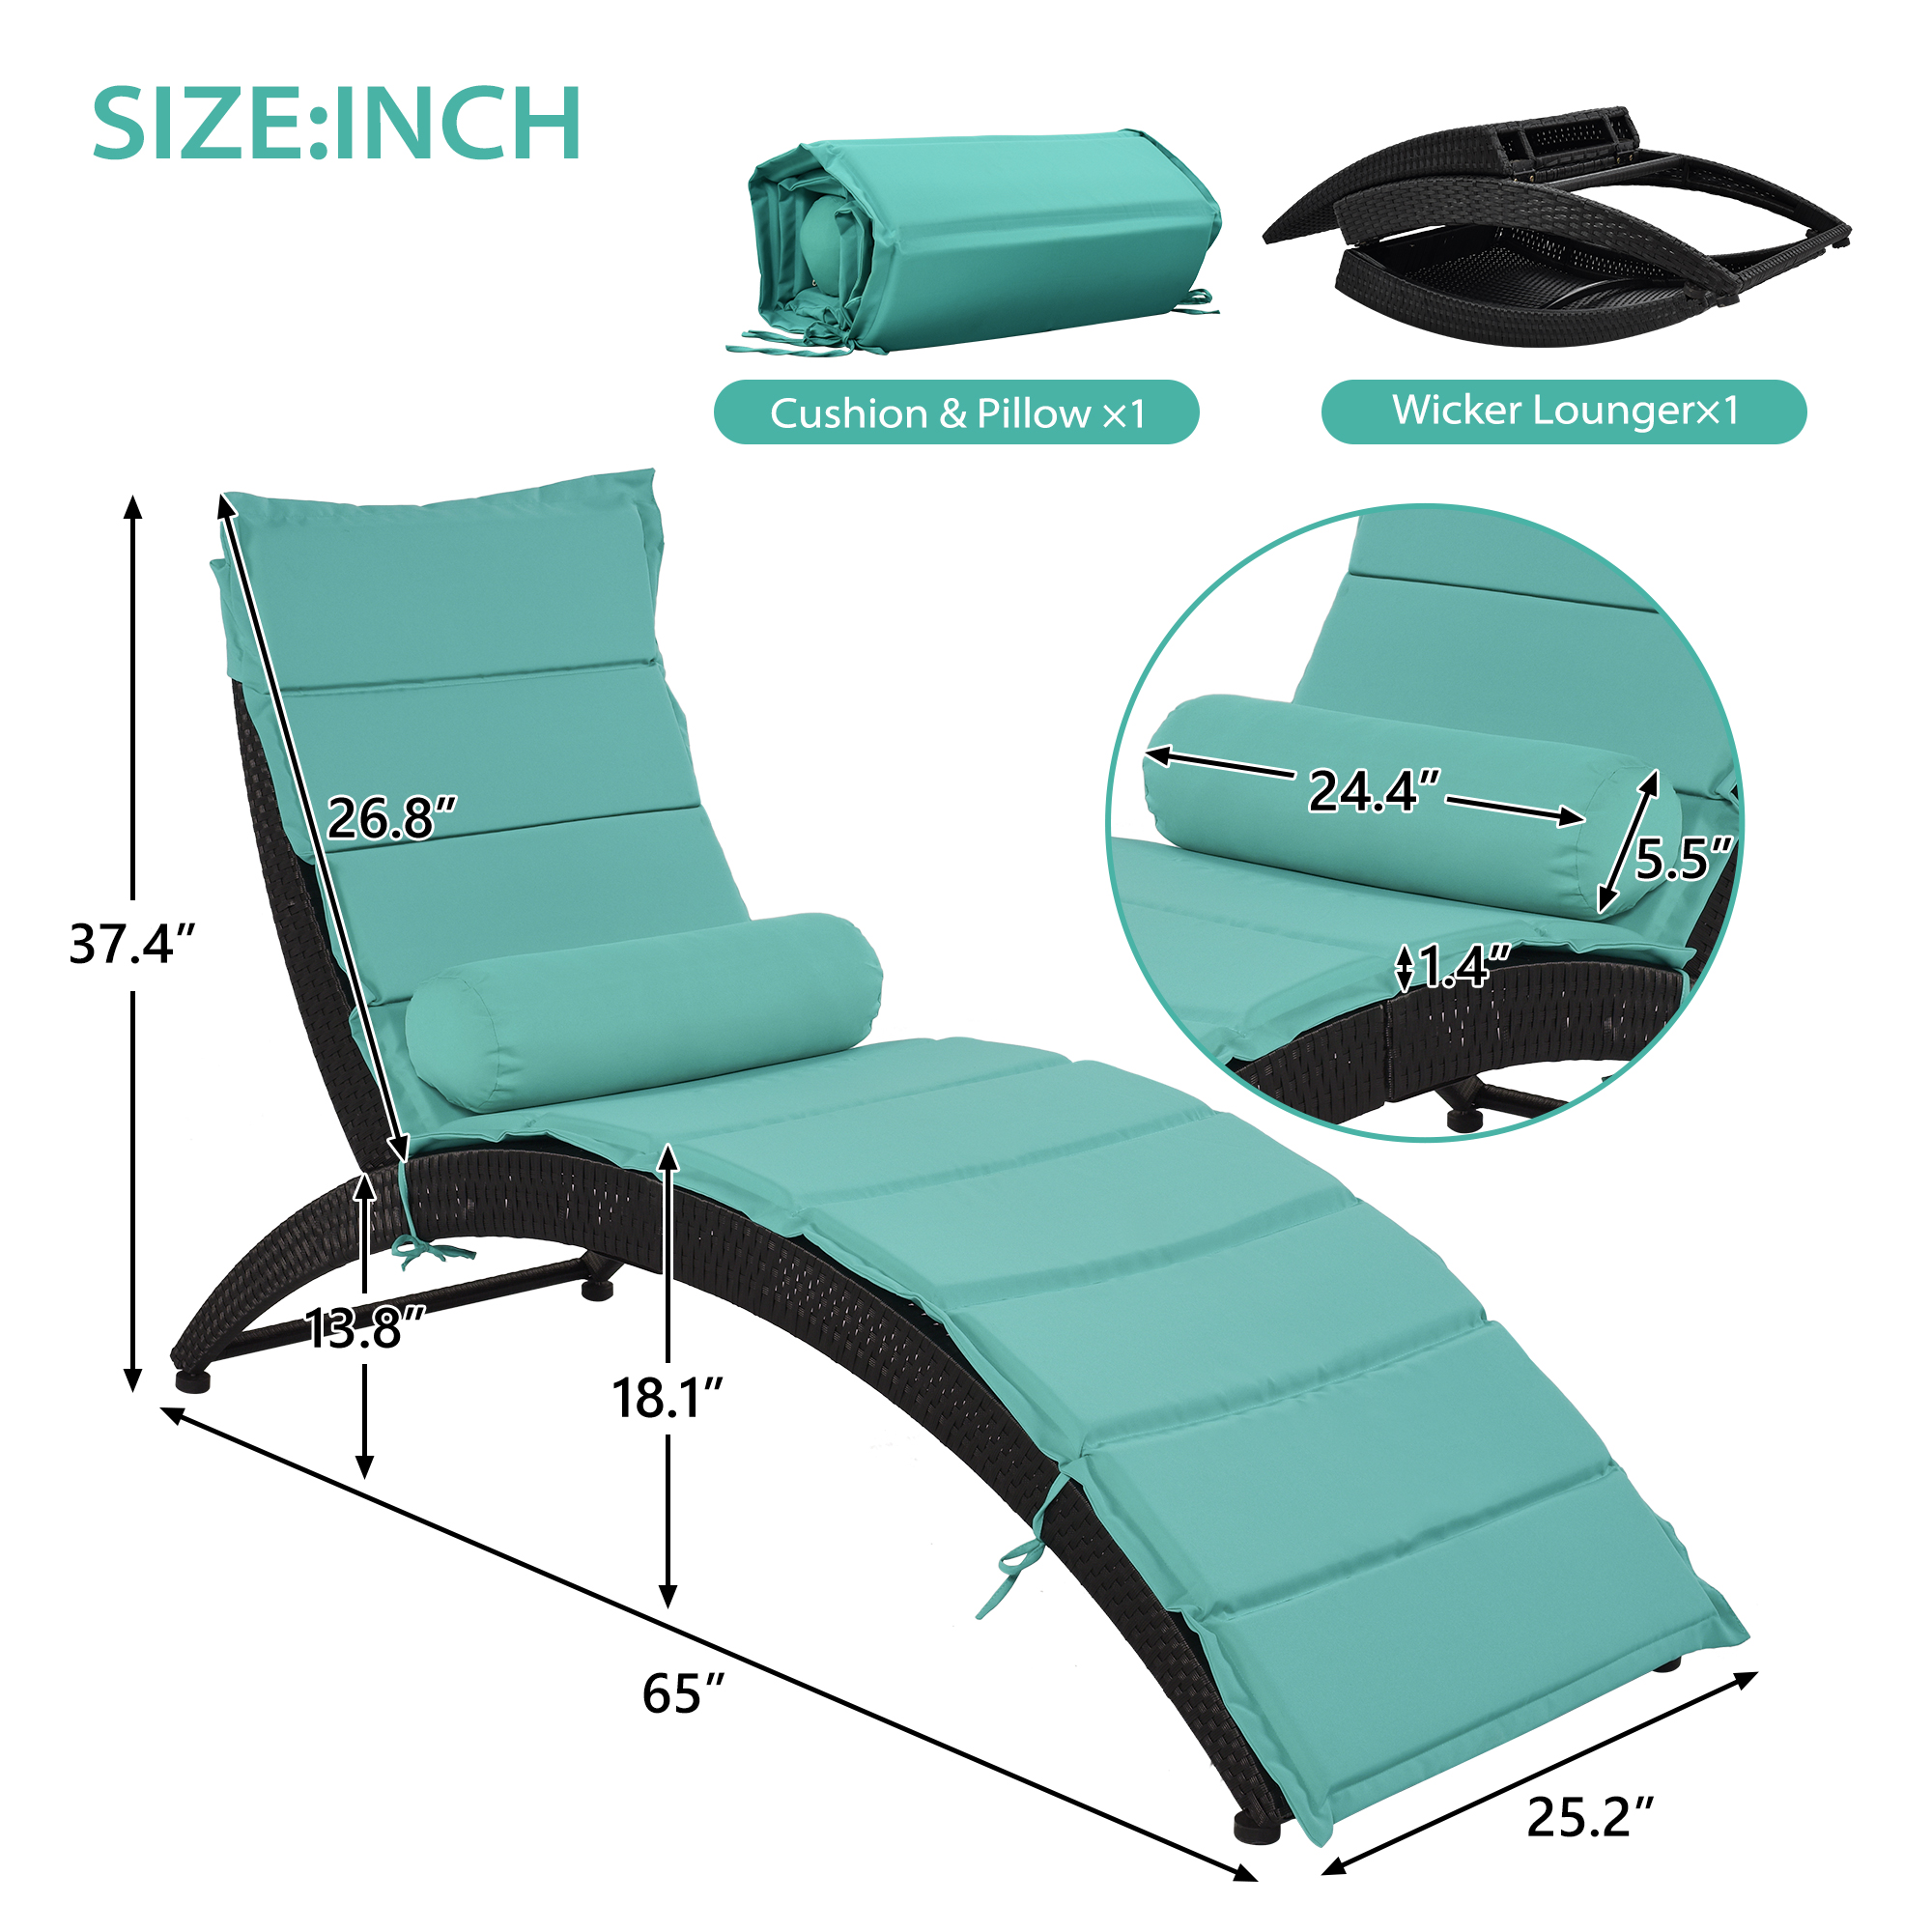 Chaise Lounge Chair for Outside, SYNGAR PE Wicker Foldable Reclining Chair, Patio Sun Lounger with Removable Cushions, Rattan Chaise Chair for Poolside, Garden, Backyard, Greenish-blue, D8584 - image 5 of 11